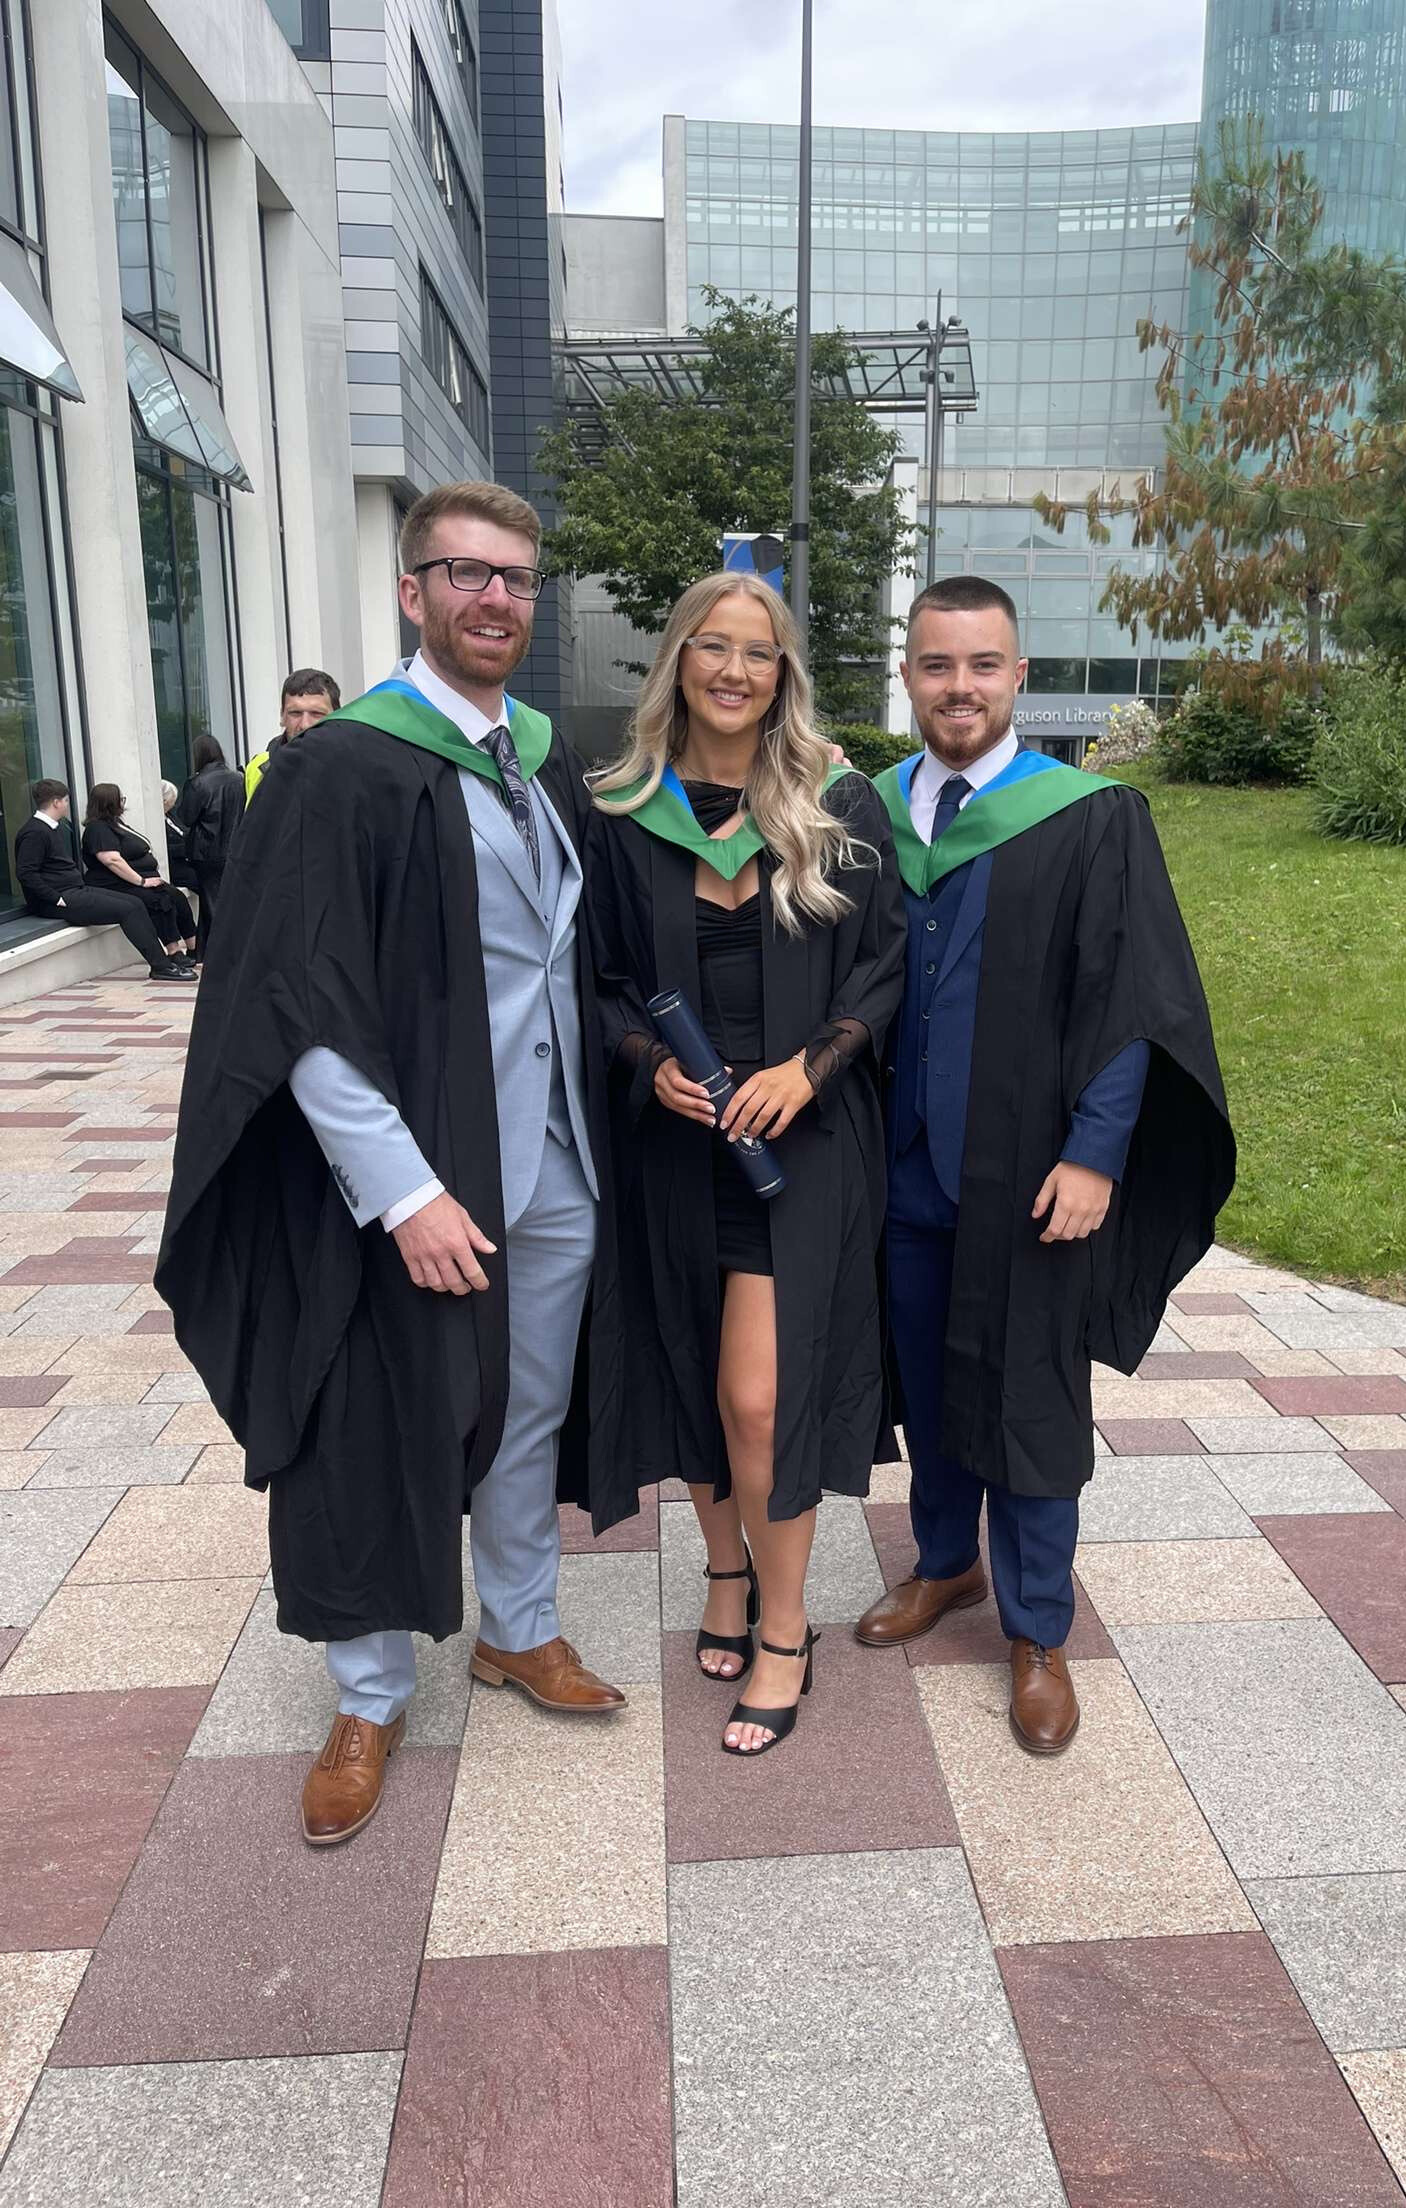 Three Clark Contracts employees graduate with honours degrees in Quantity Surveying